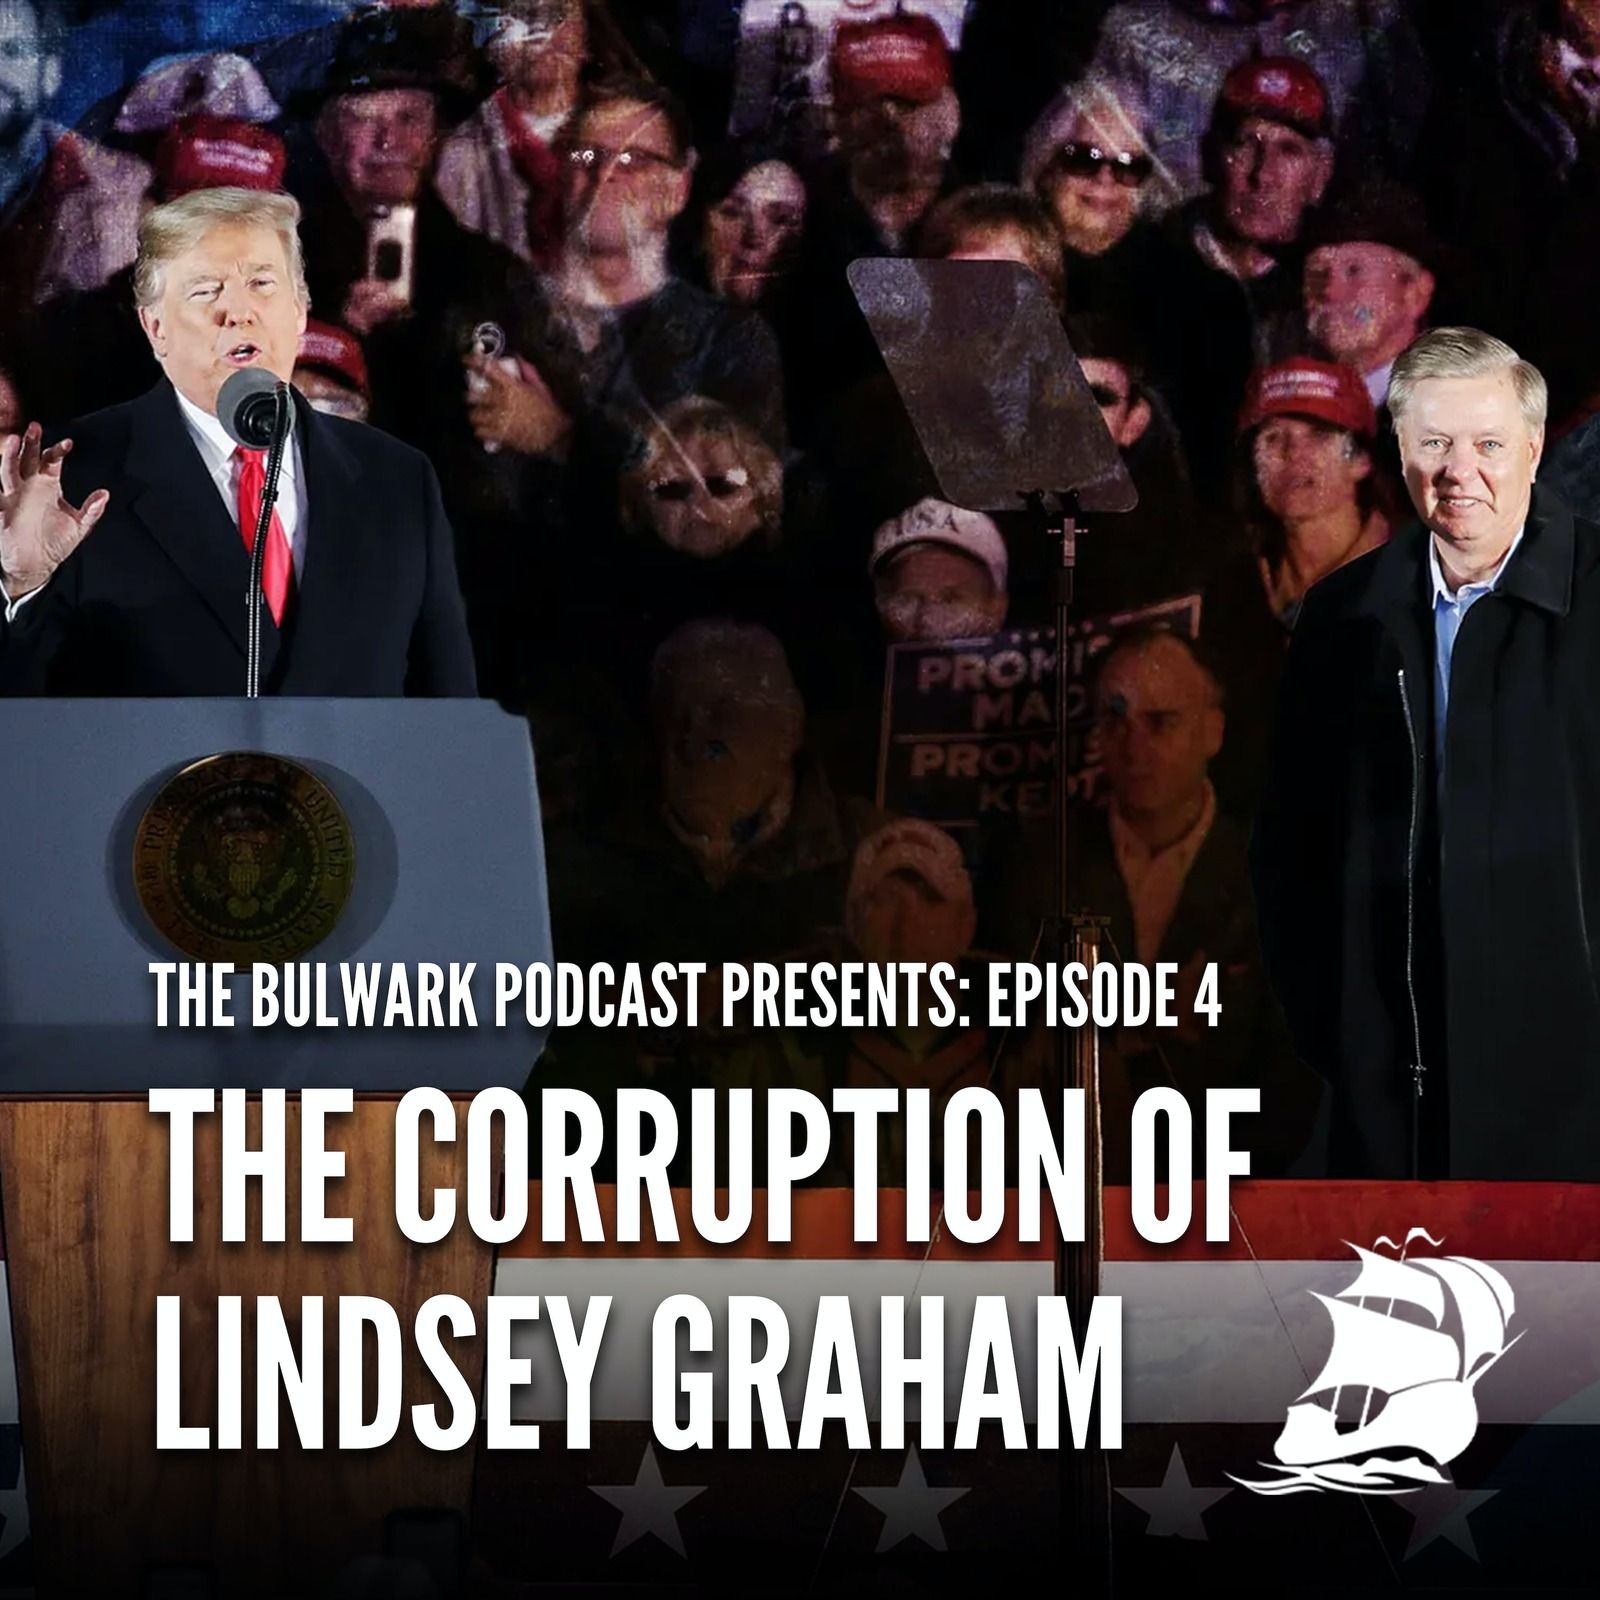 Ep. 4: The Corruption of Lindsey Graham by The Bulwark Podcast